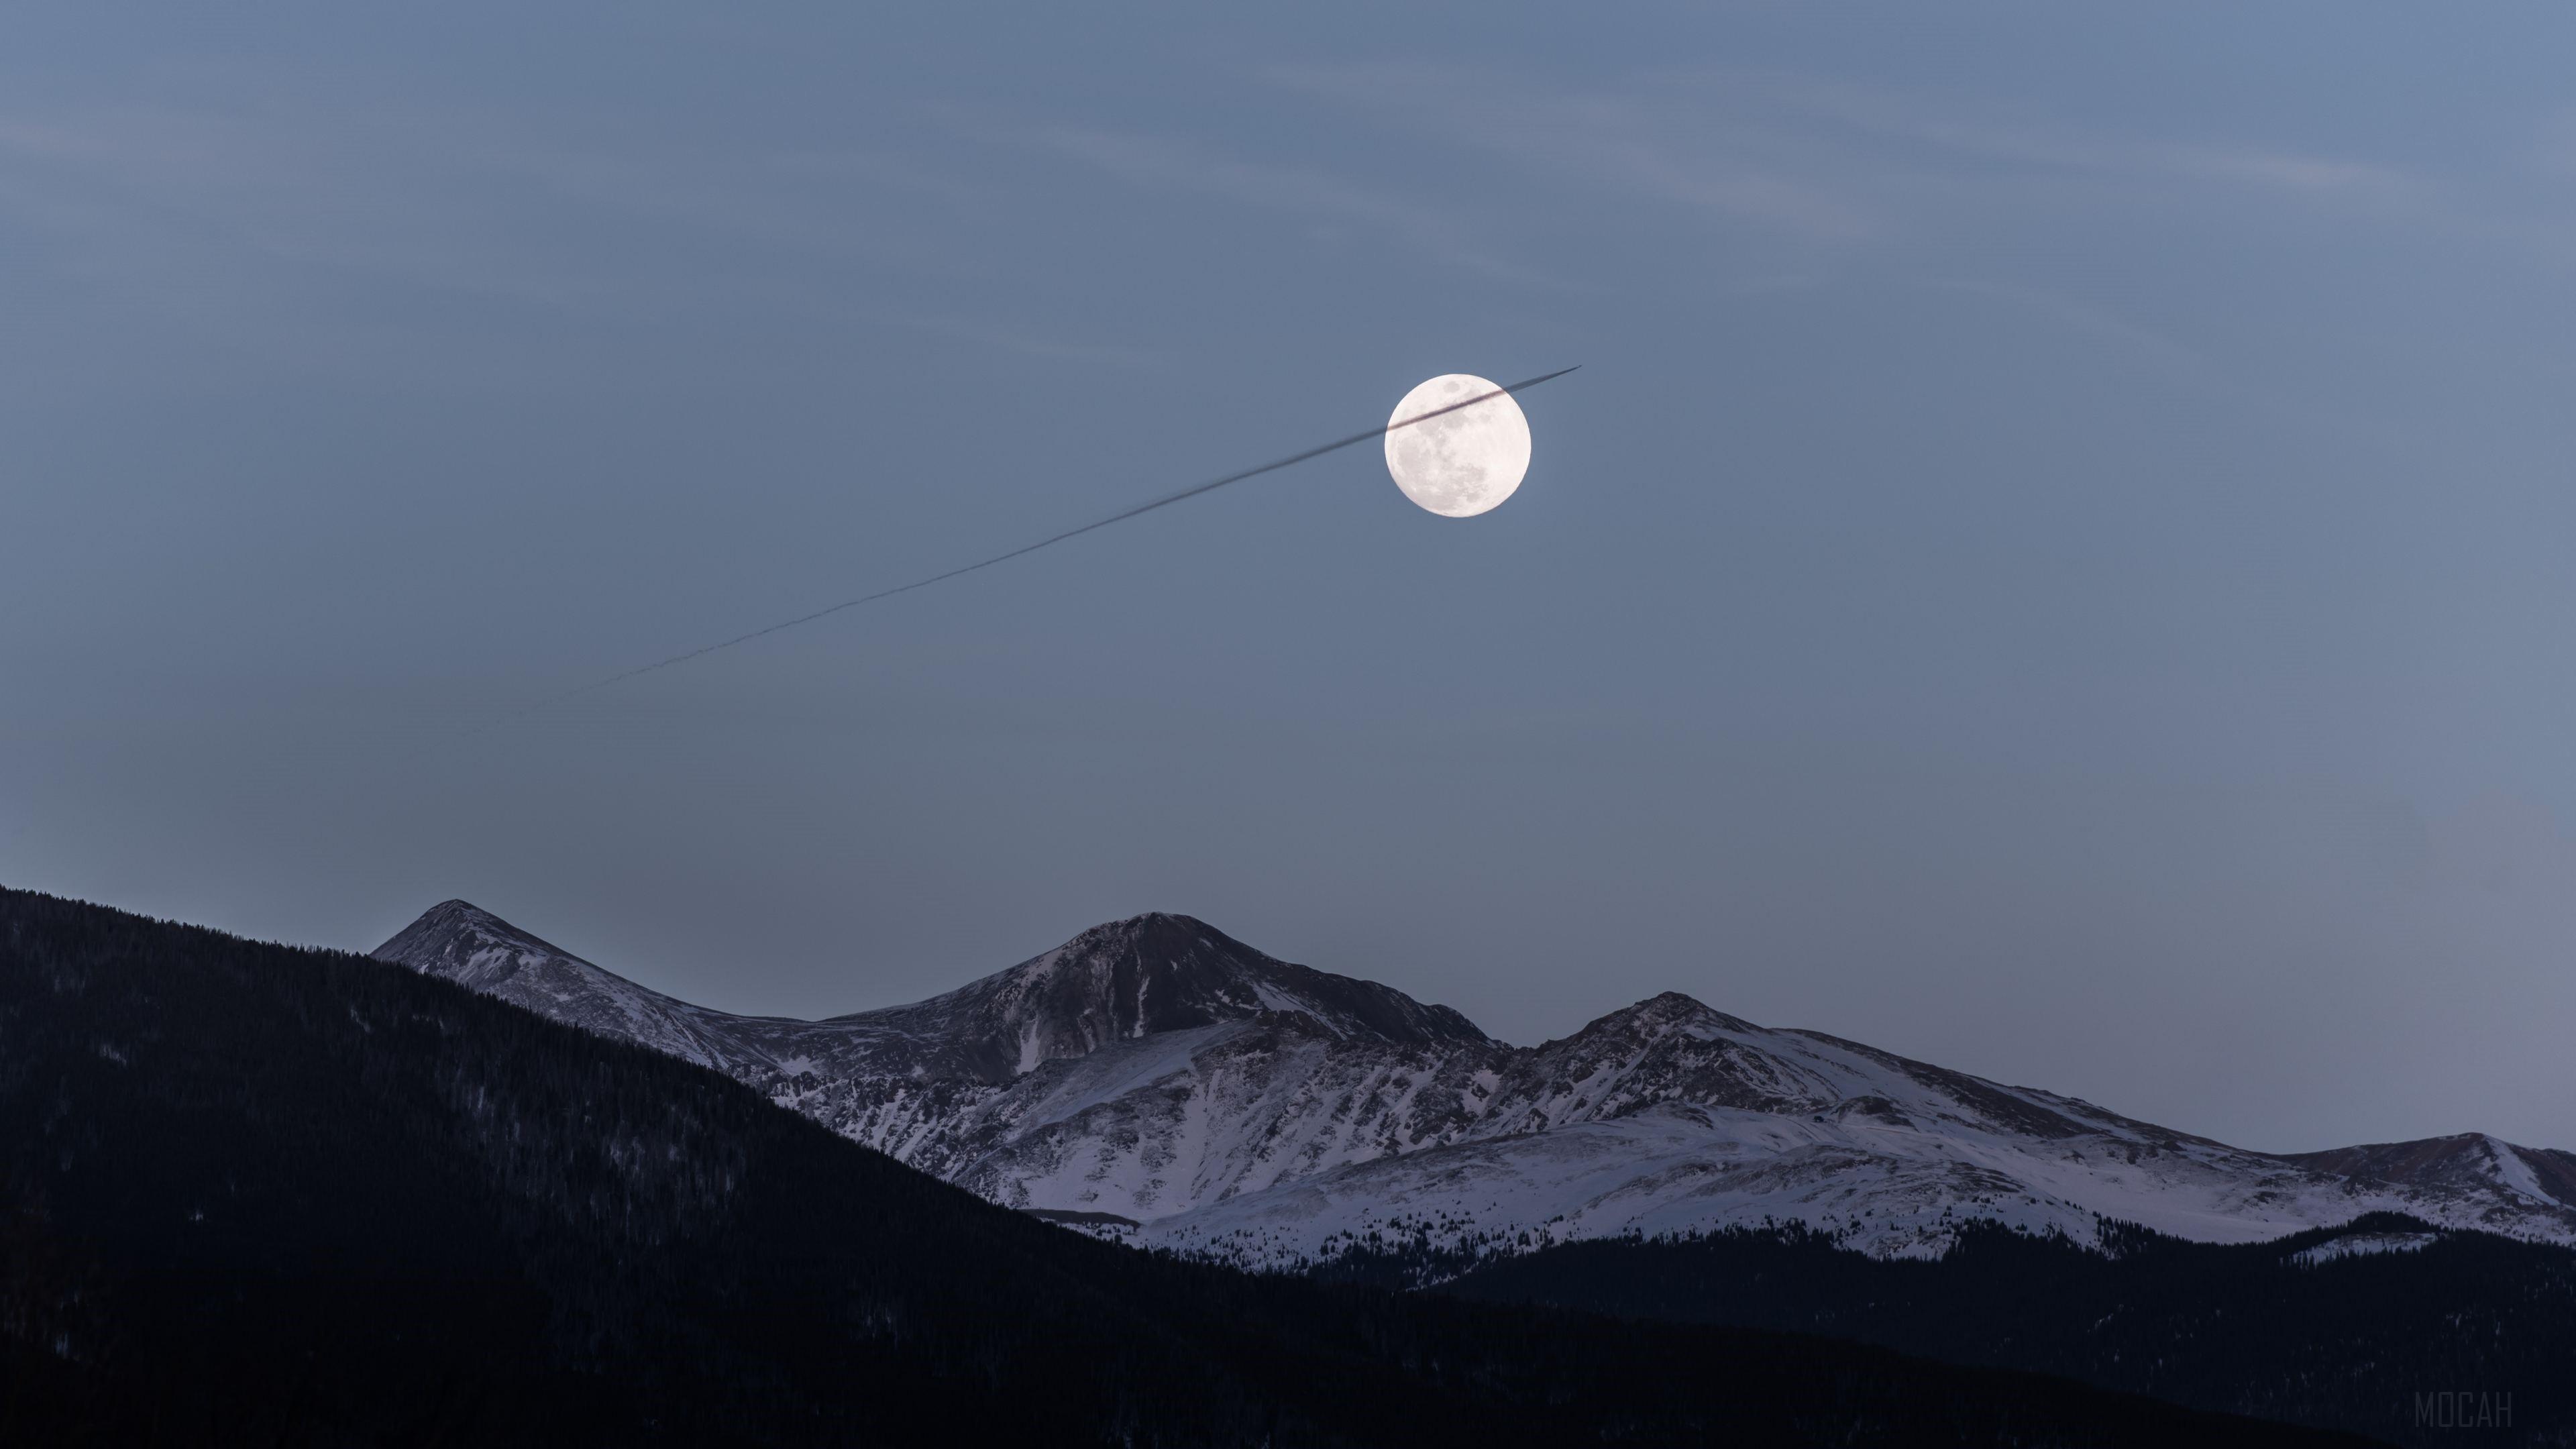 HD wallpaper, Moon Over Snowy Mountains 4K